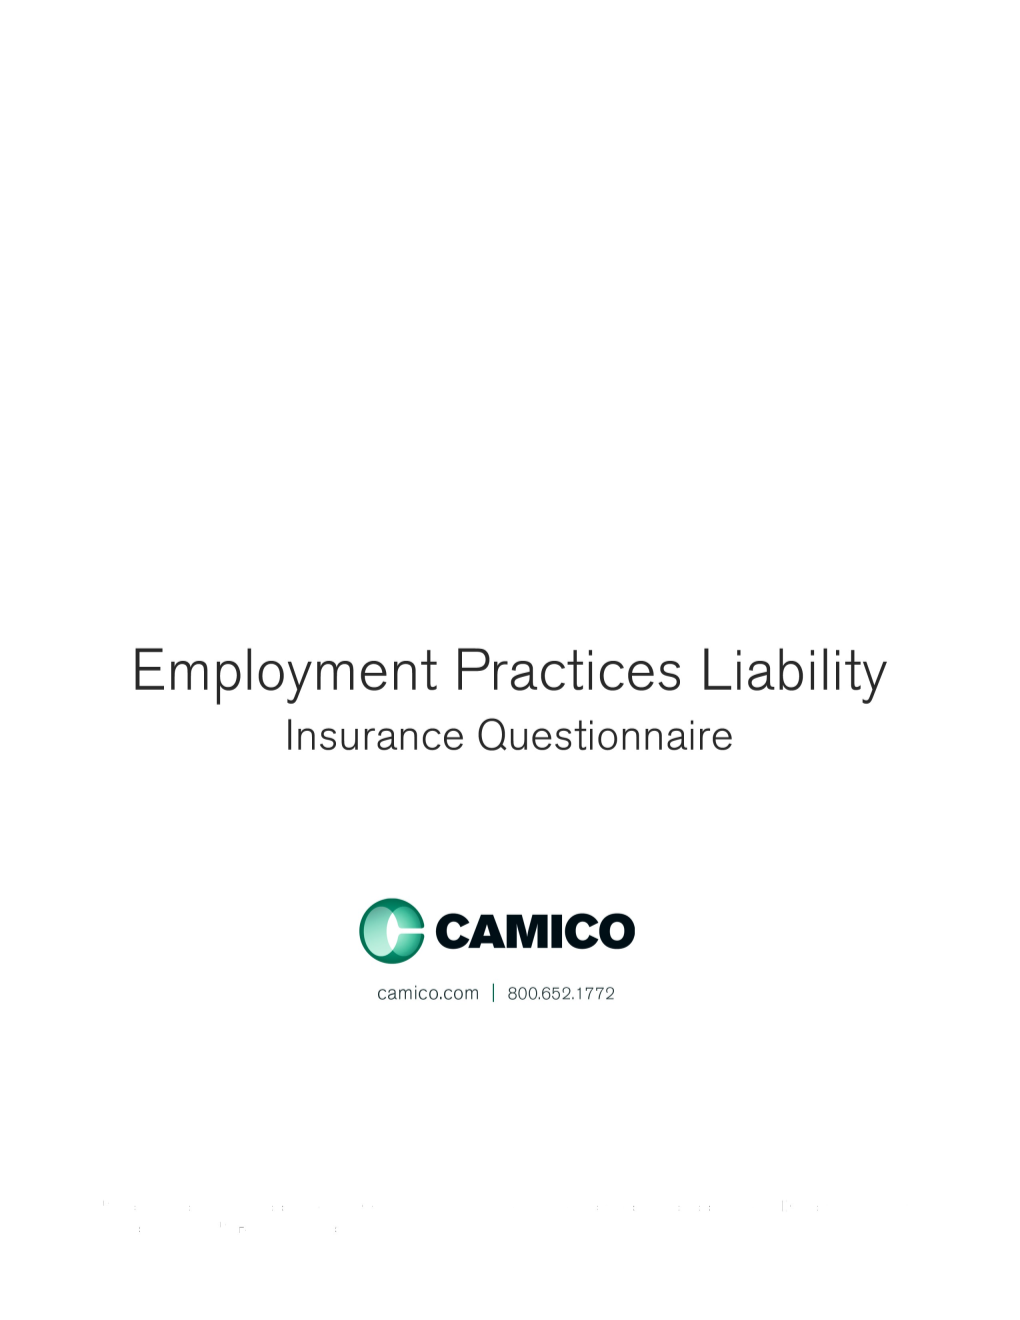 Apply for a CAMICO Employment Practices Liability (EPL) Policy